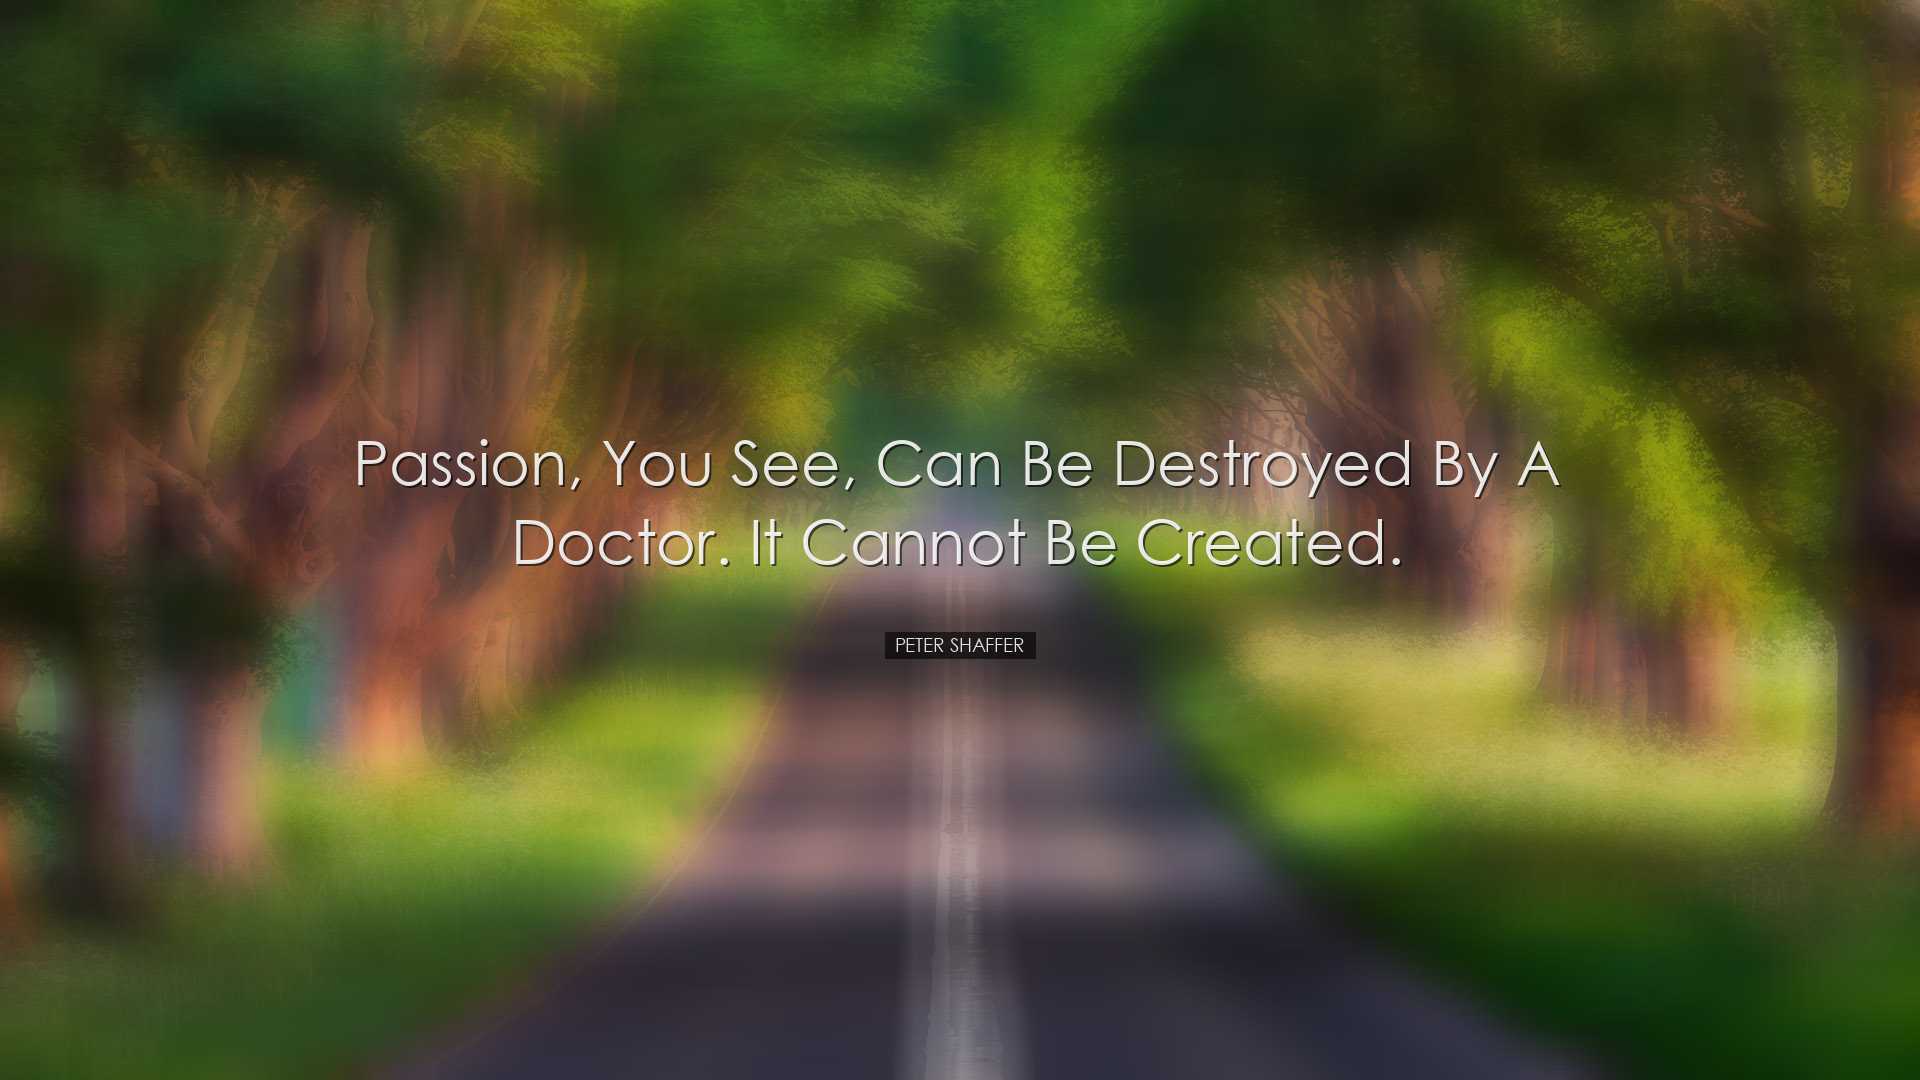 Passion, you see, can be destroyed by a doctor. It cannot be creat